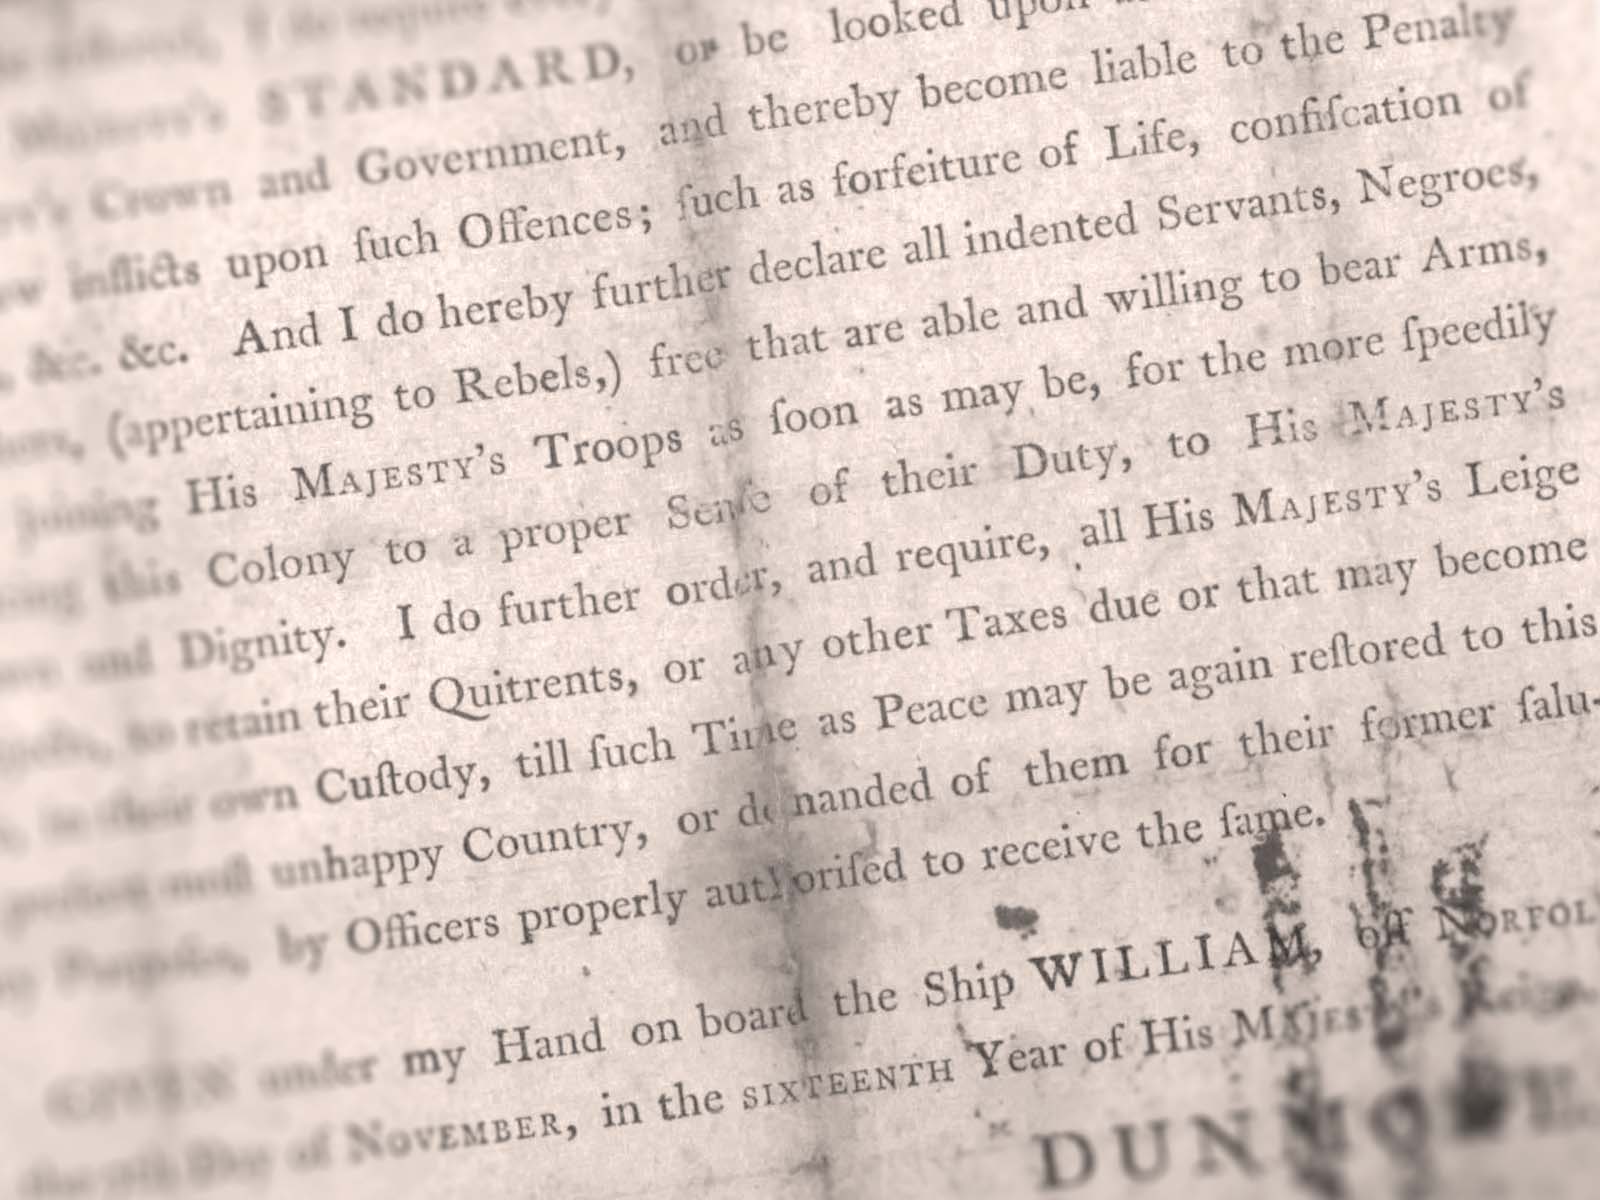 Closeup of printed proclamation signed with “Dunmore” in all capital letters in bottom right corner.